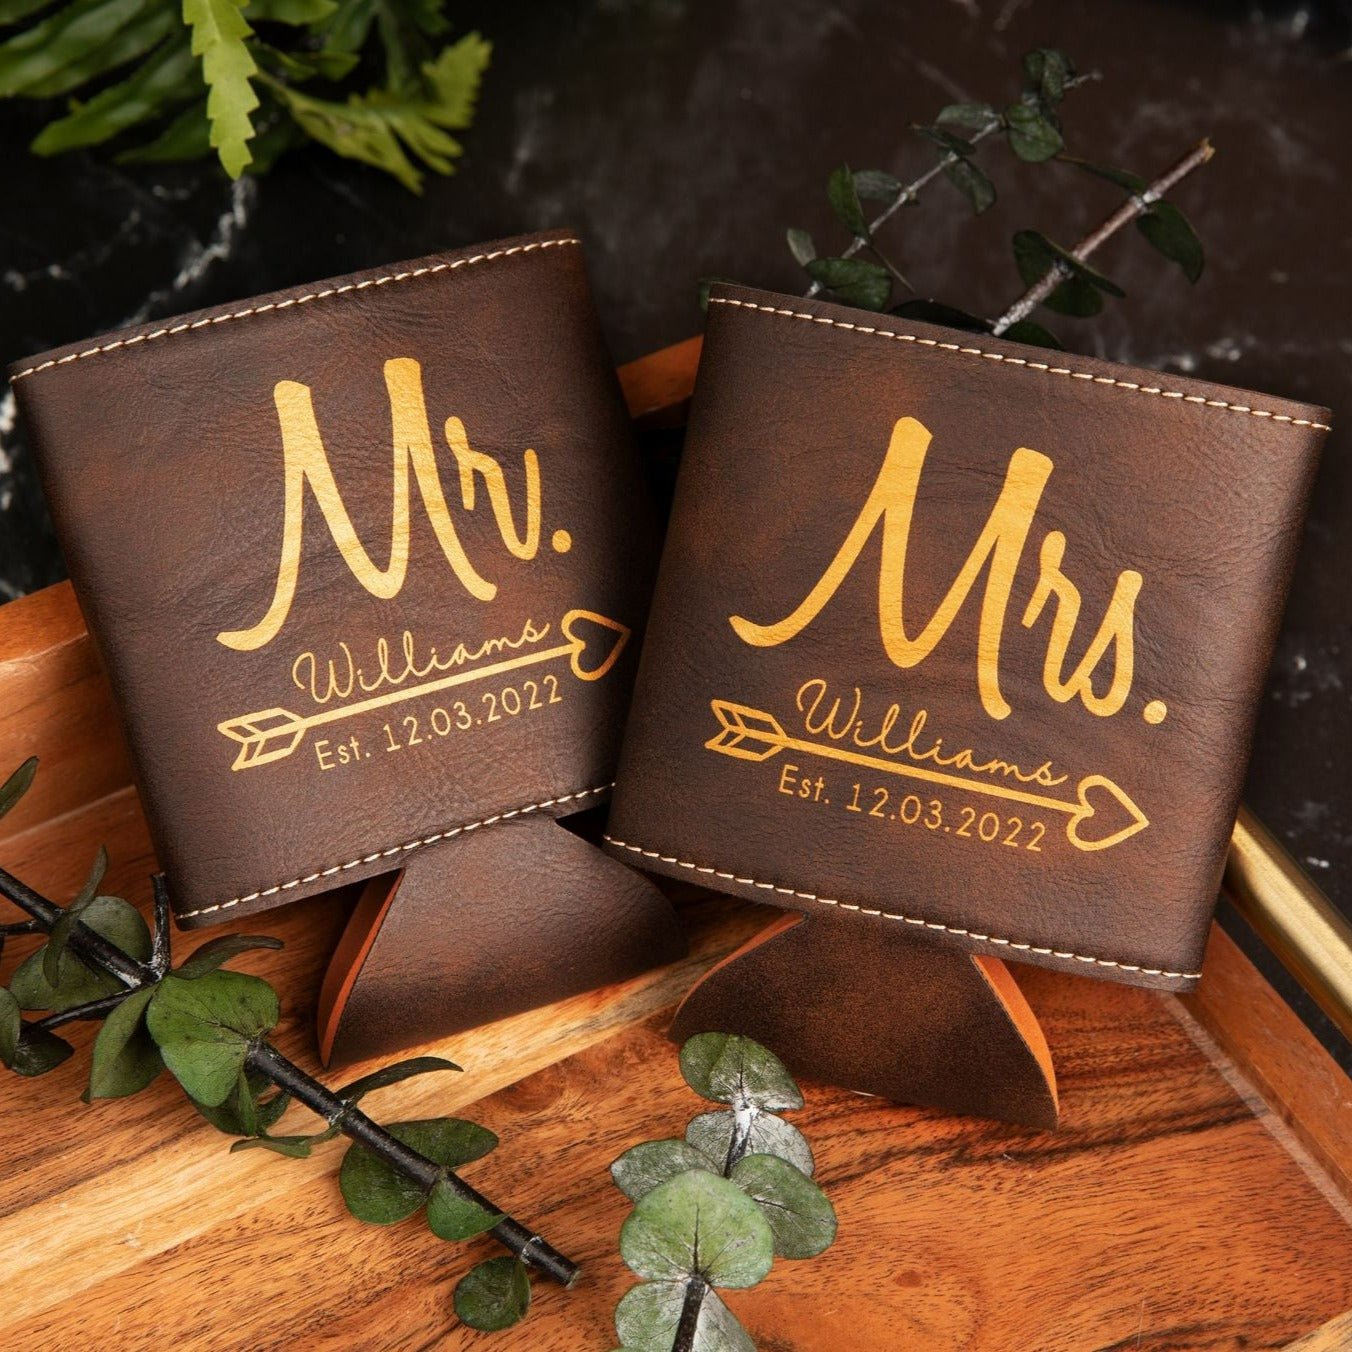 Personalized Mr. and Mrs. Leather Insulated Koozie - Set of 2 - TheirBigDay